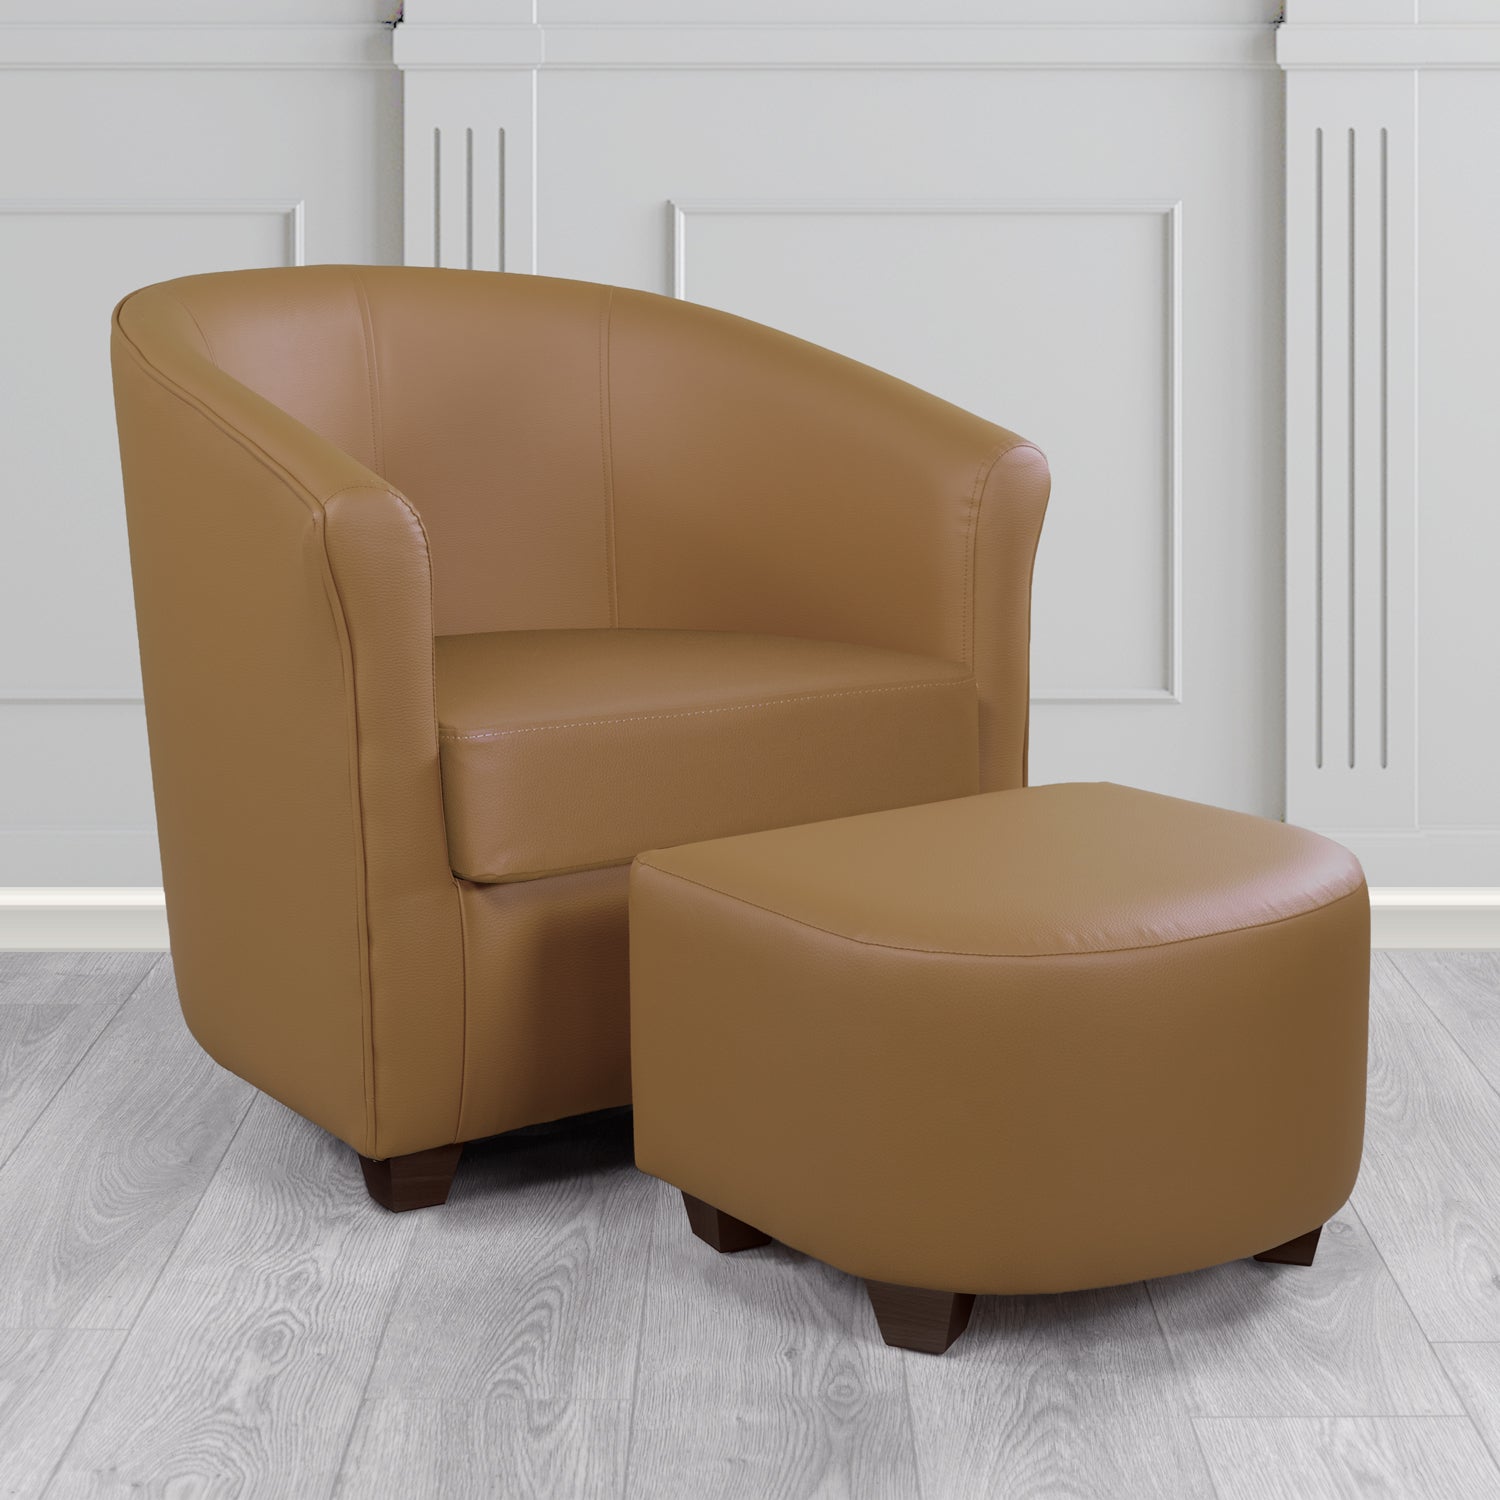 Cannes Tub Chair with Footstool Set in Just Colour Nutmeg Crib 5 Faux Leather - The Tub Chair Shop